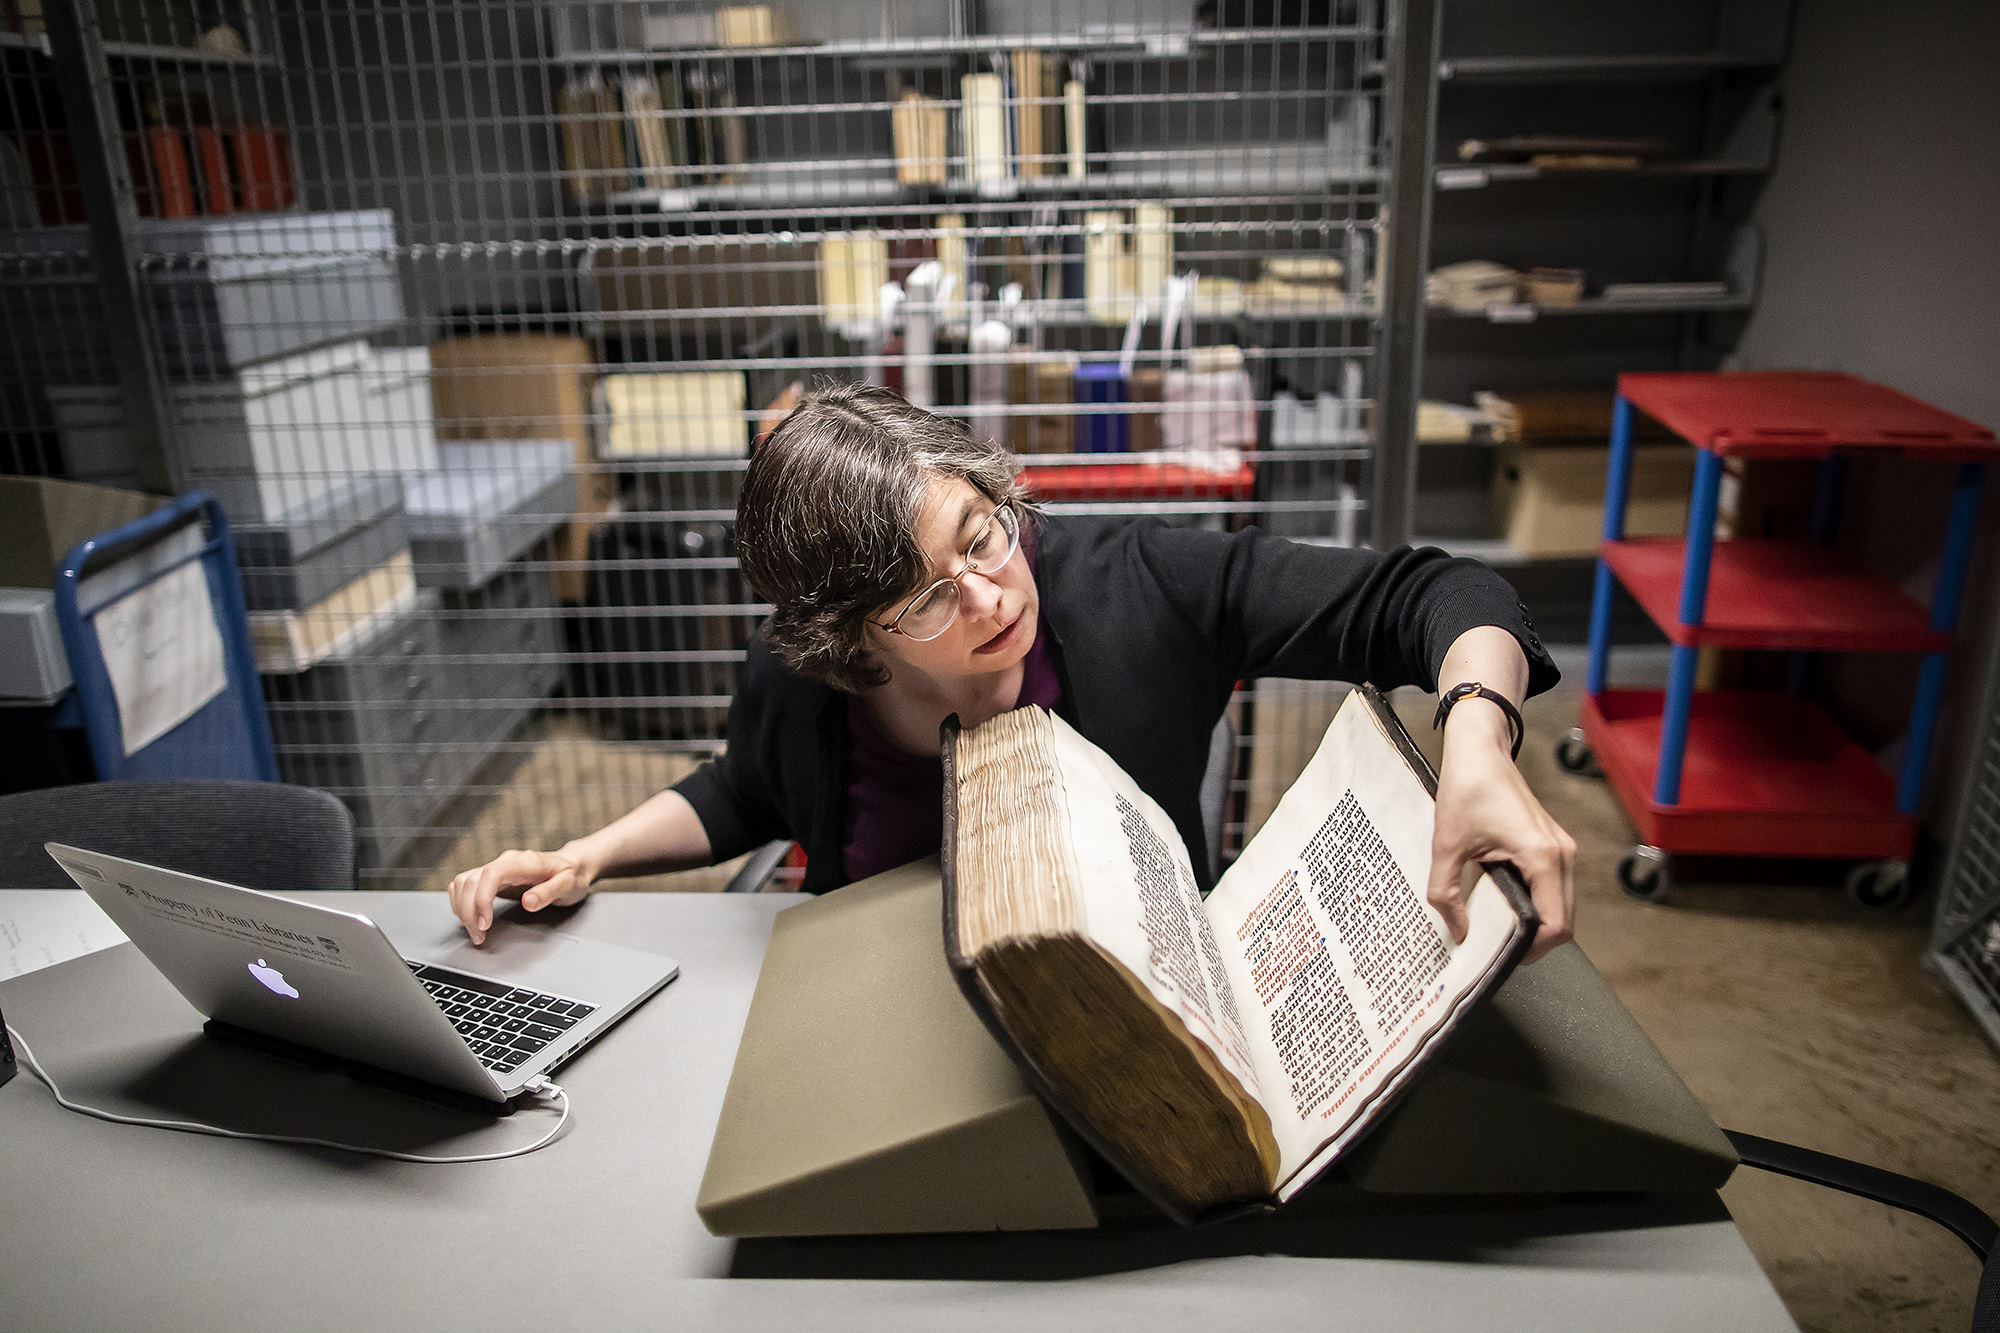 Academic in the process of digitizing a book.